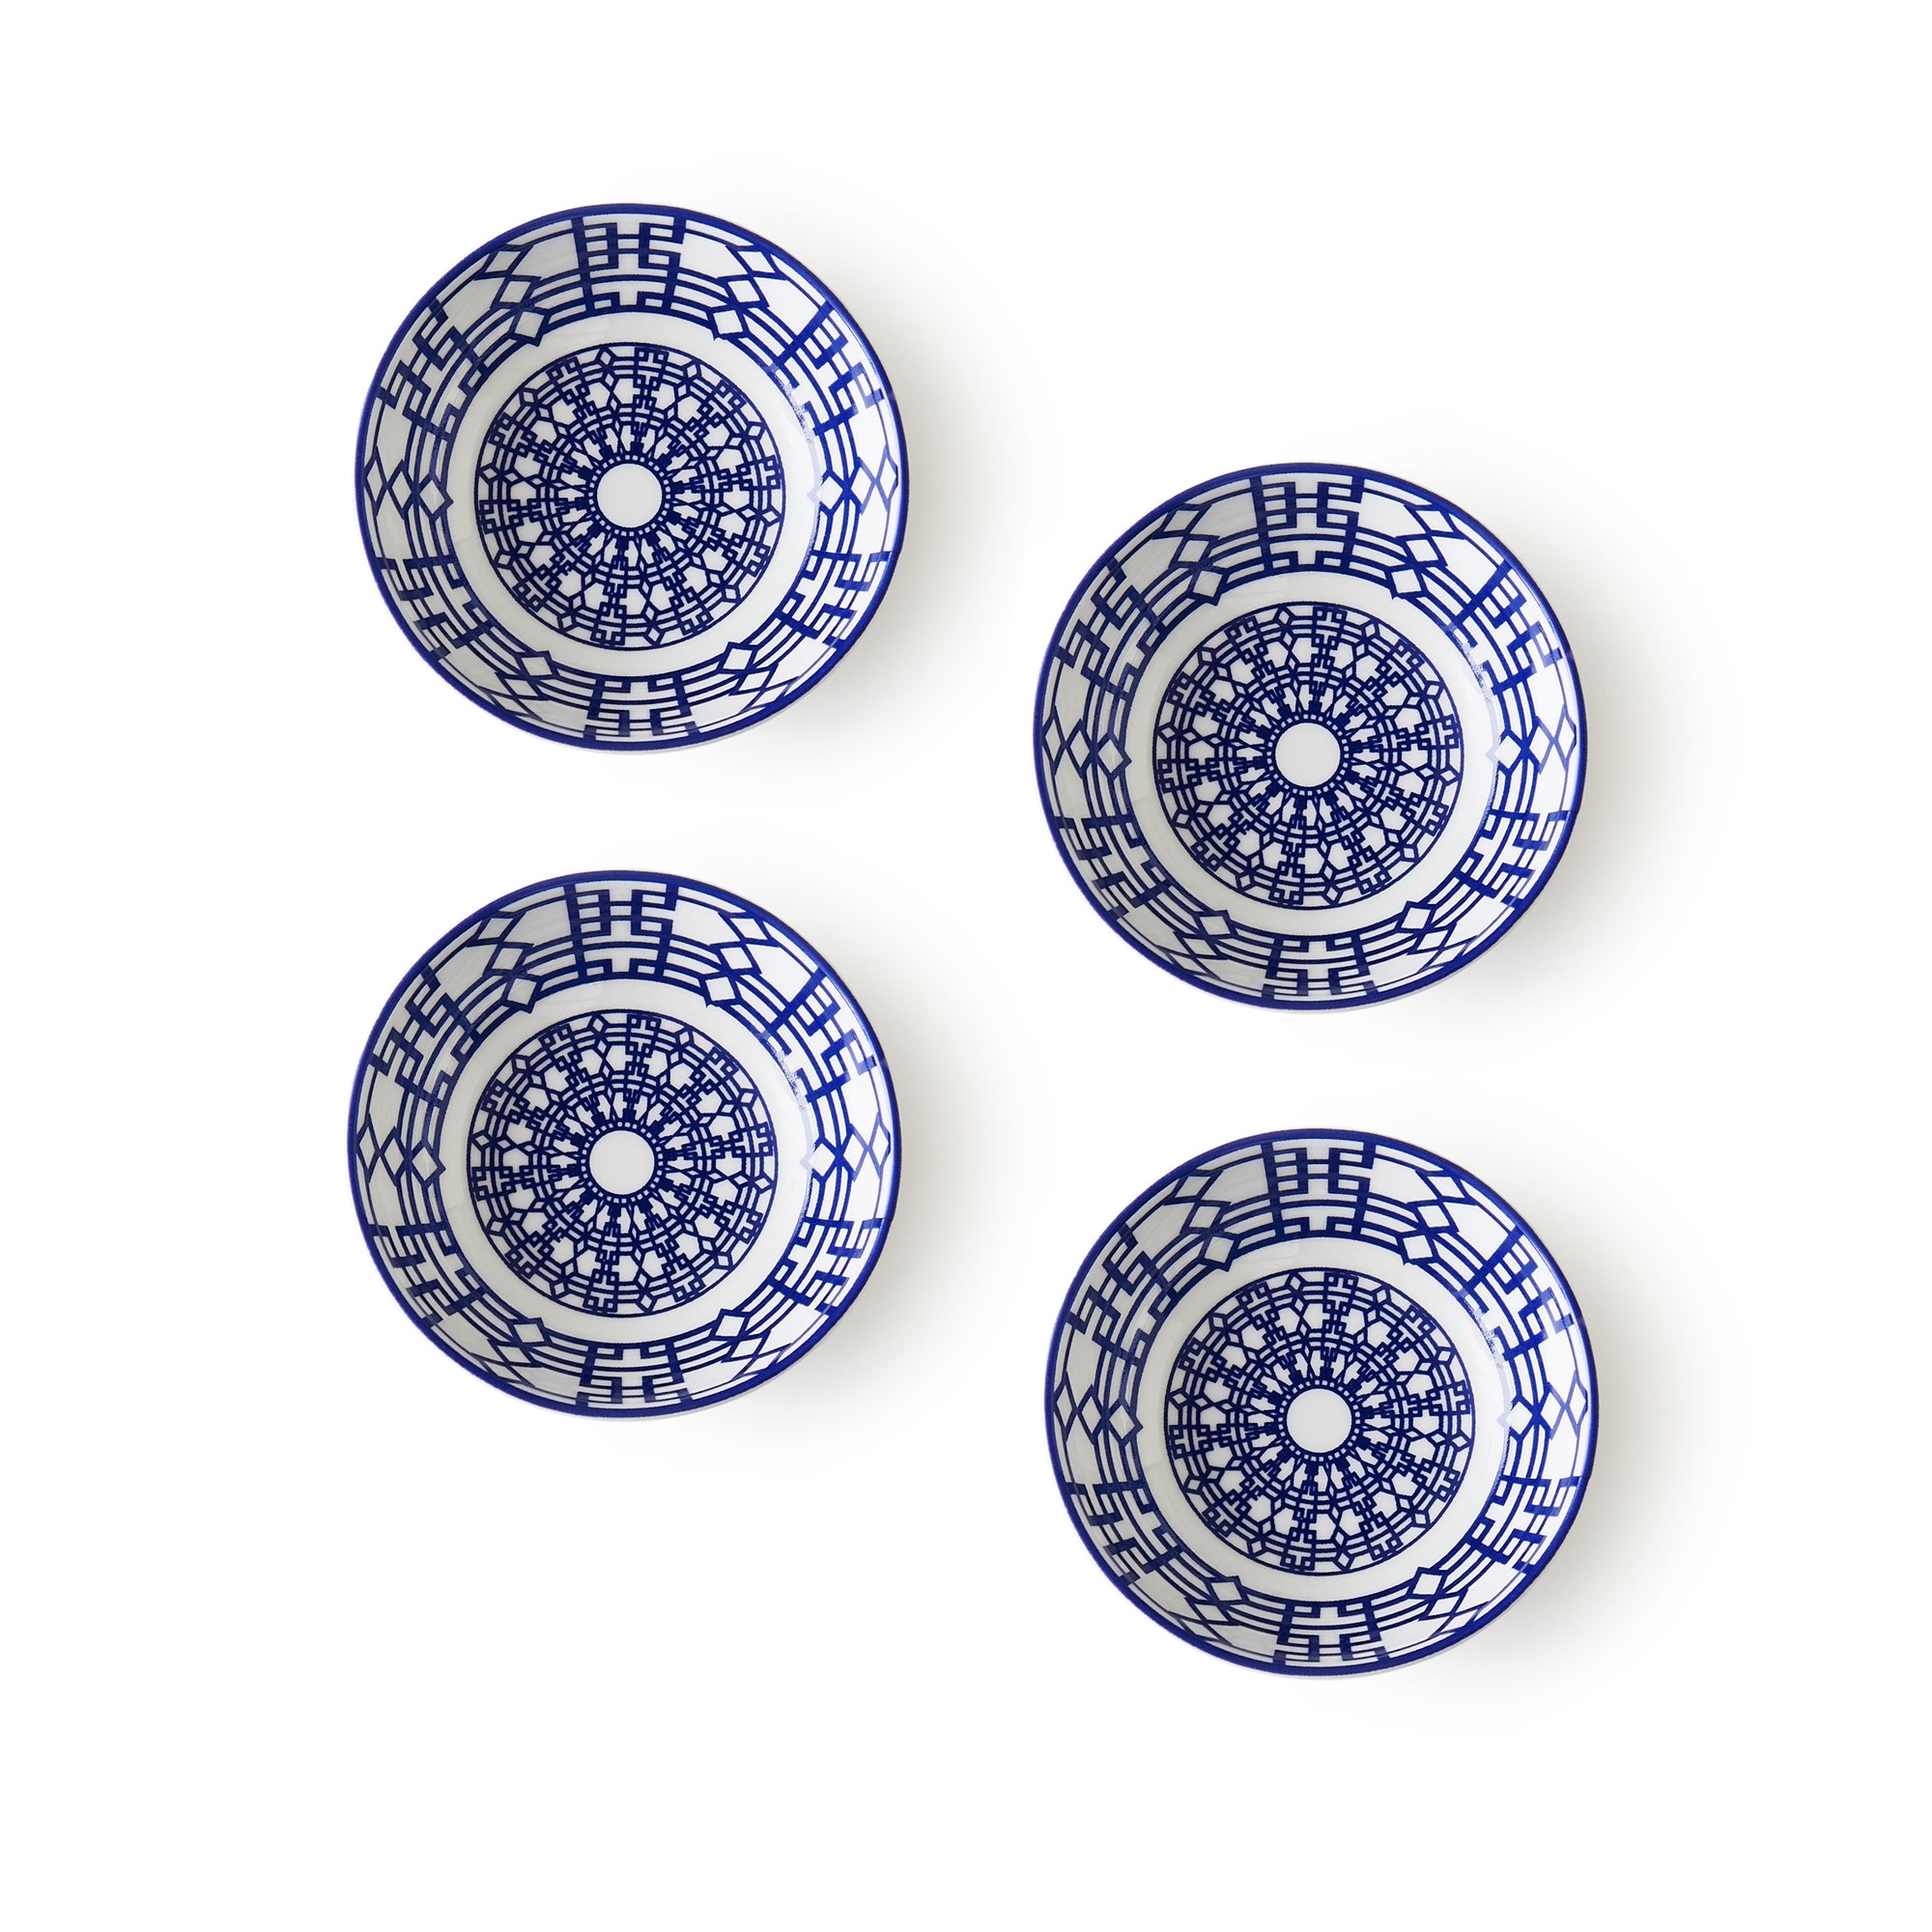 Four Newport Dipping Dishes, Set of 4 by Caskata with intricate blue geometric patterns, reminiscent of the Newport Garden Gate's interlocking lattice pattern, are evenly spaced against a plain white background.